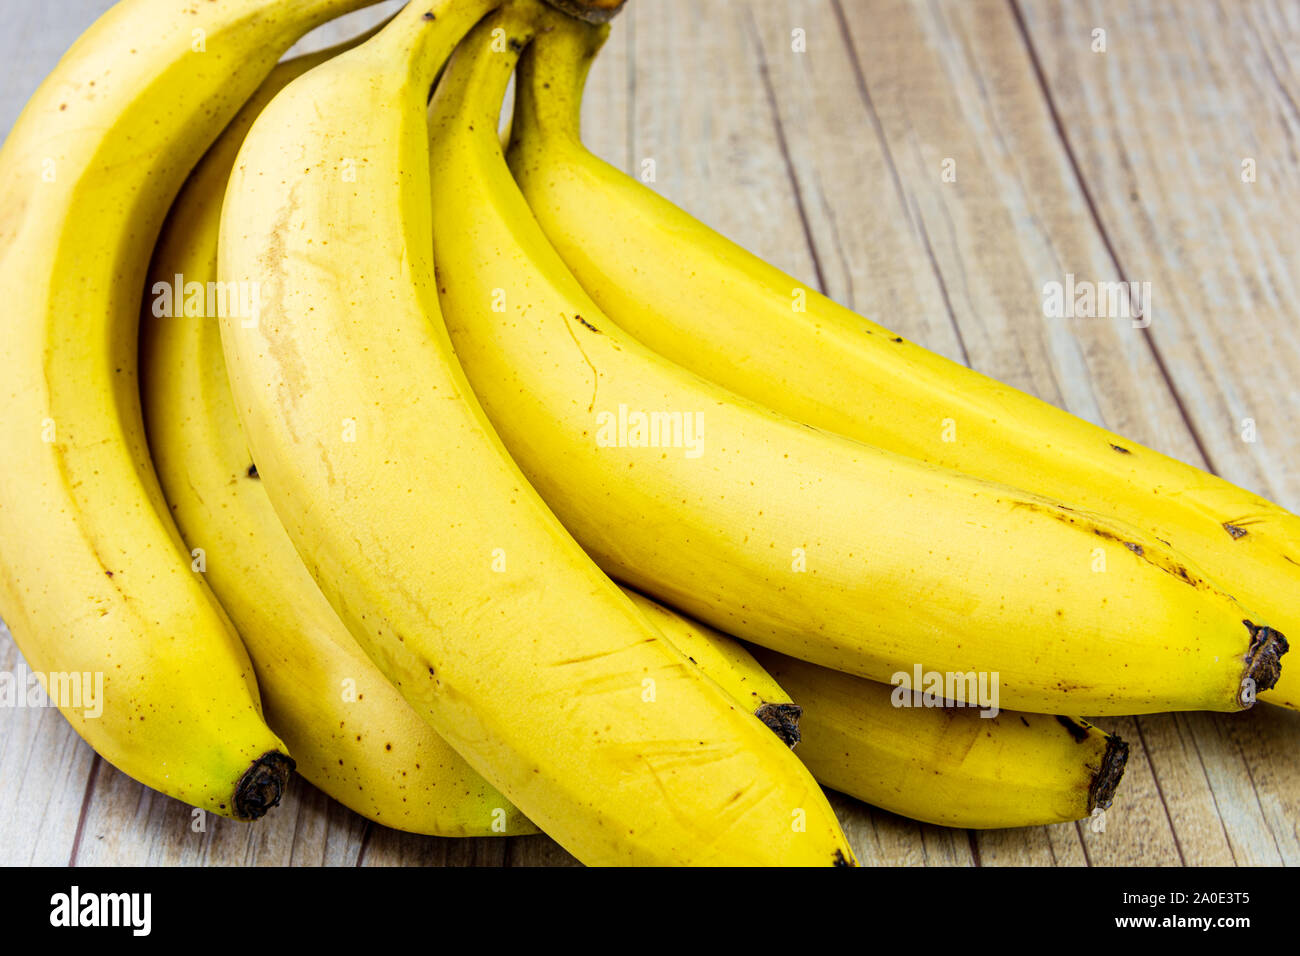 A bunch of Bananas with Blemishes Stock Photo